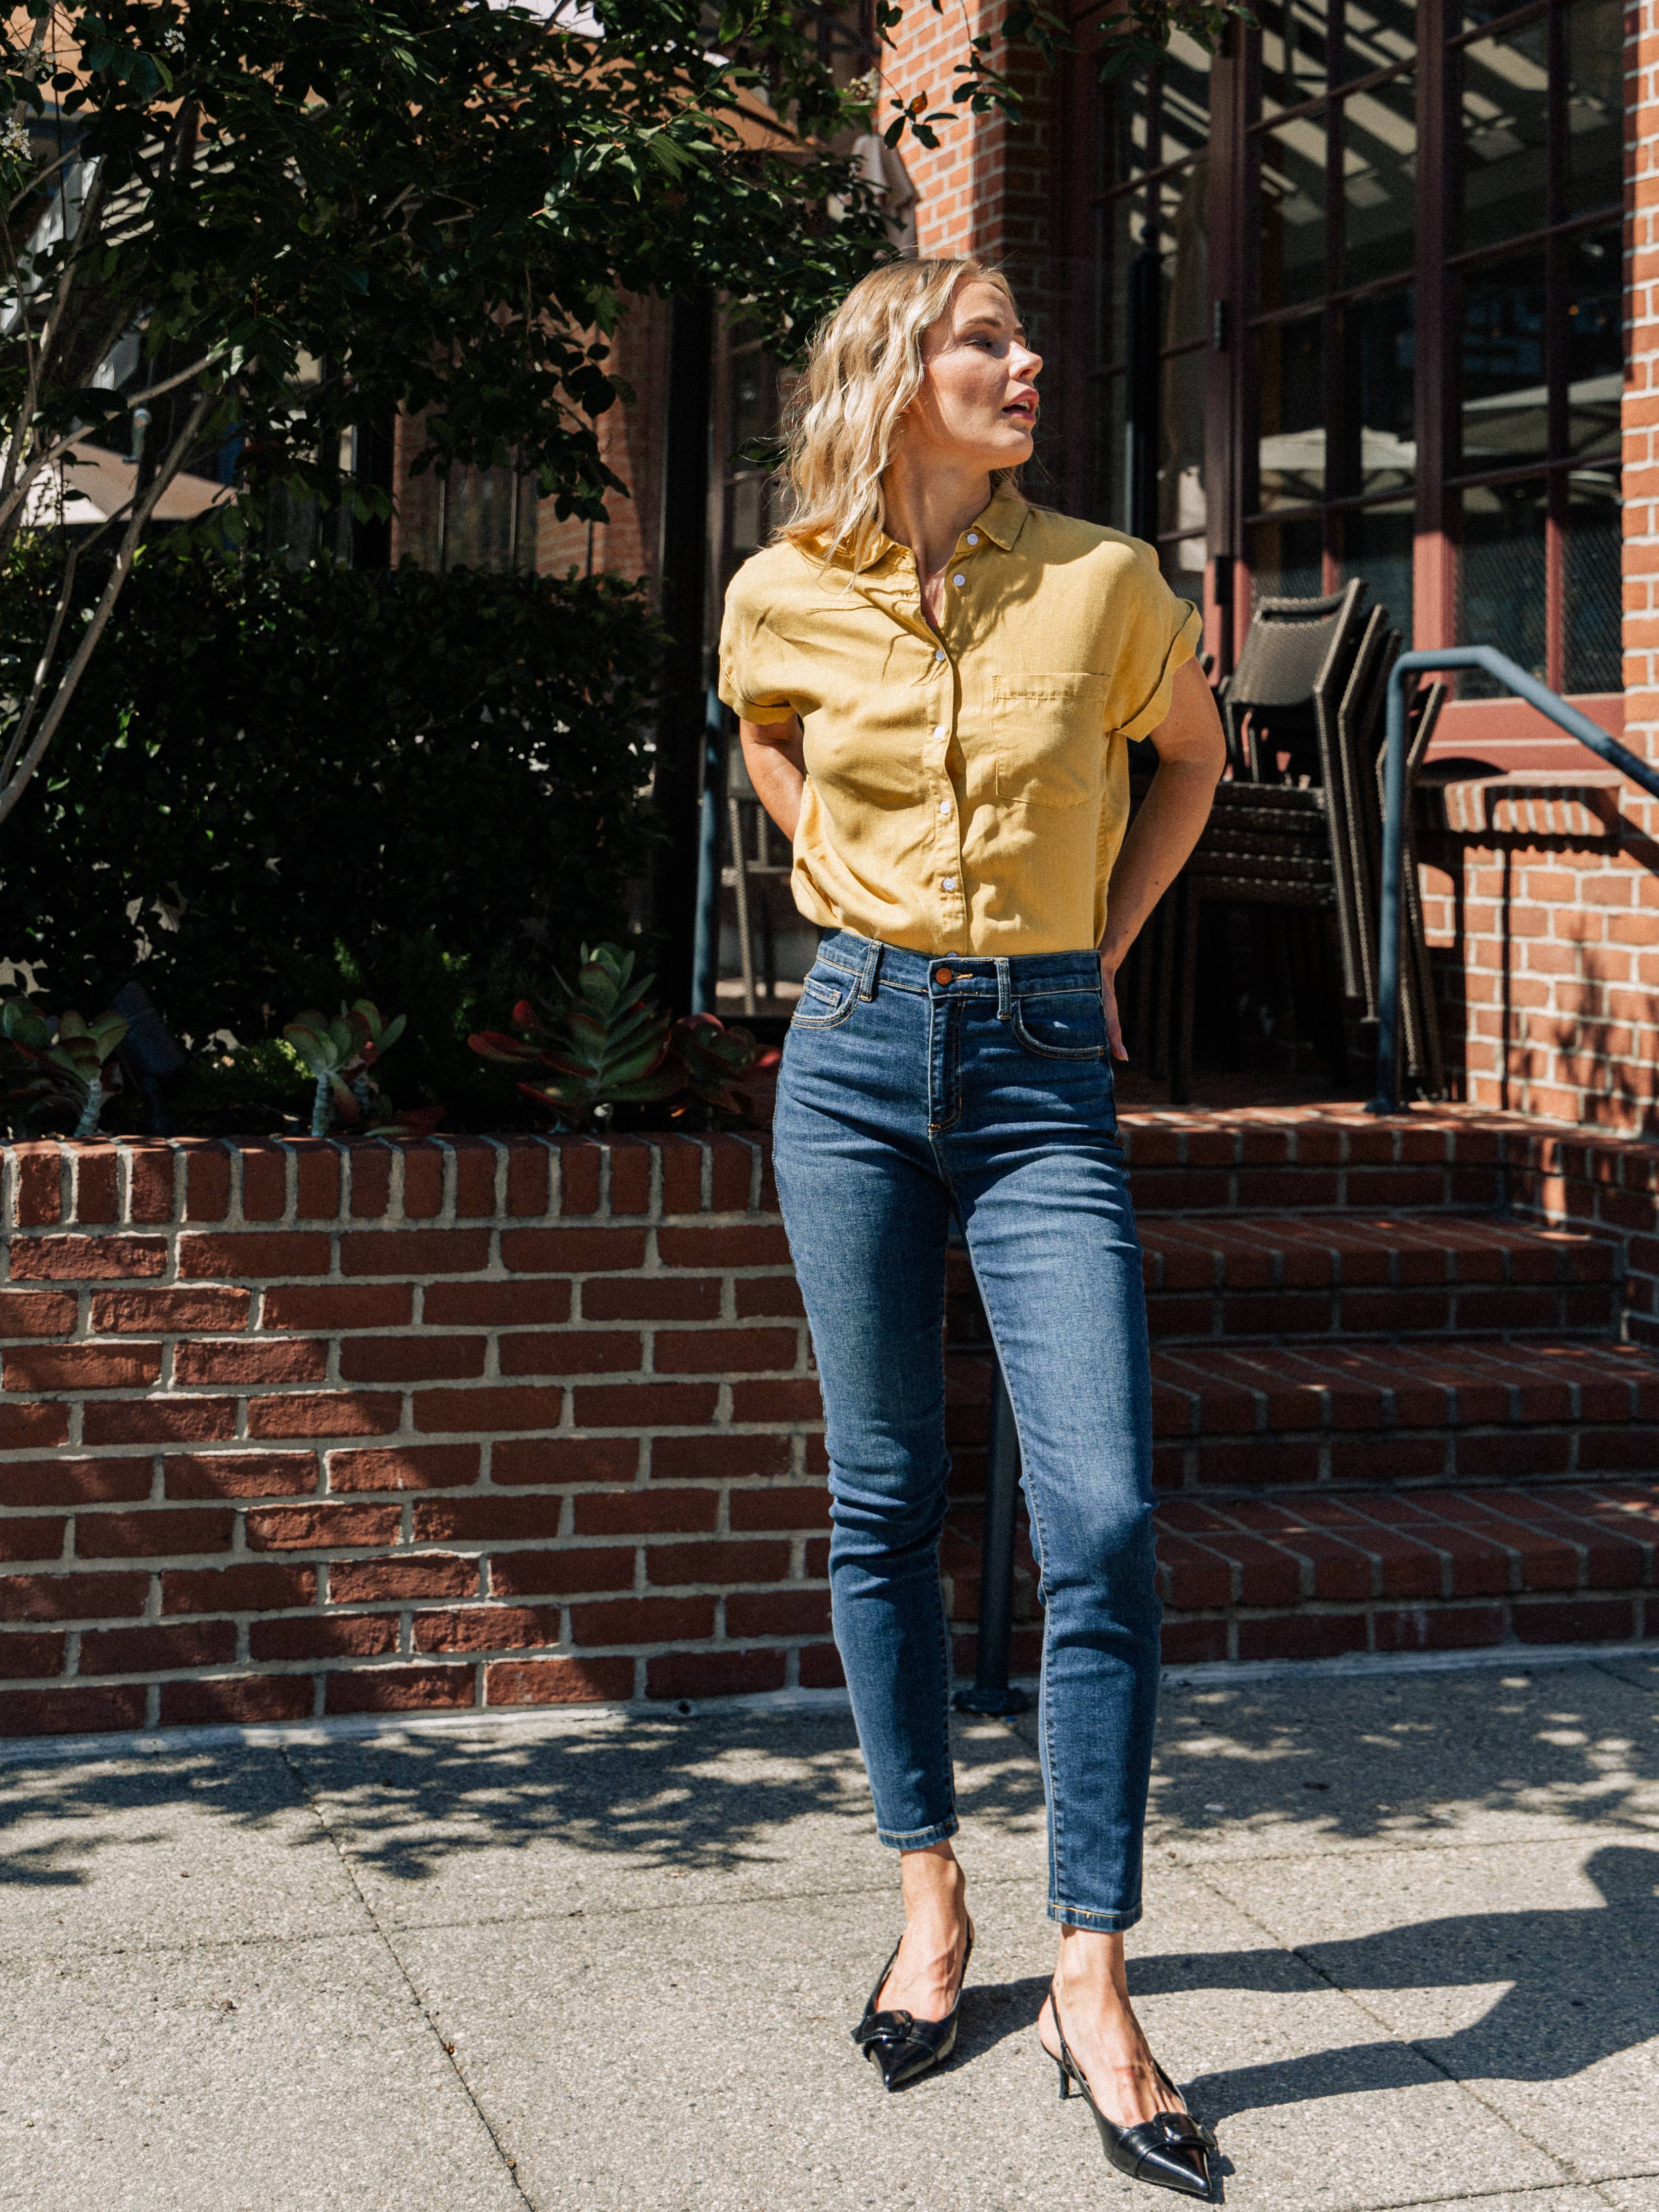 The Classic Skinny High Waist Jeans